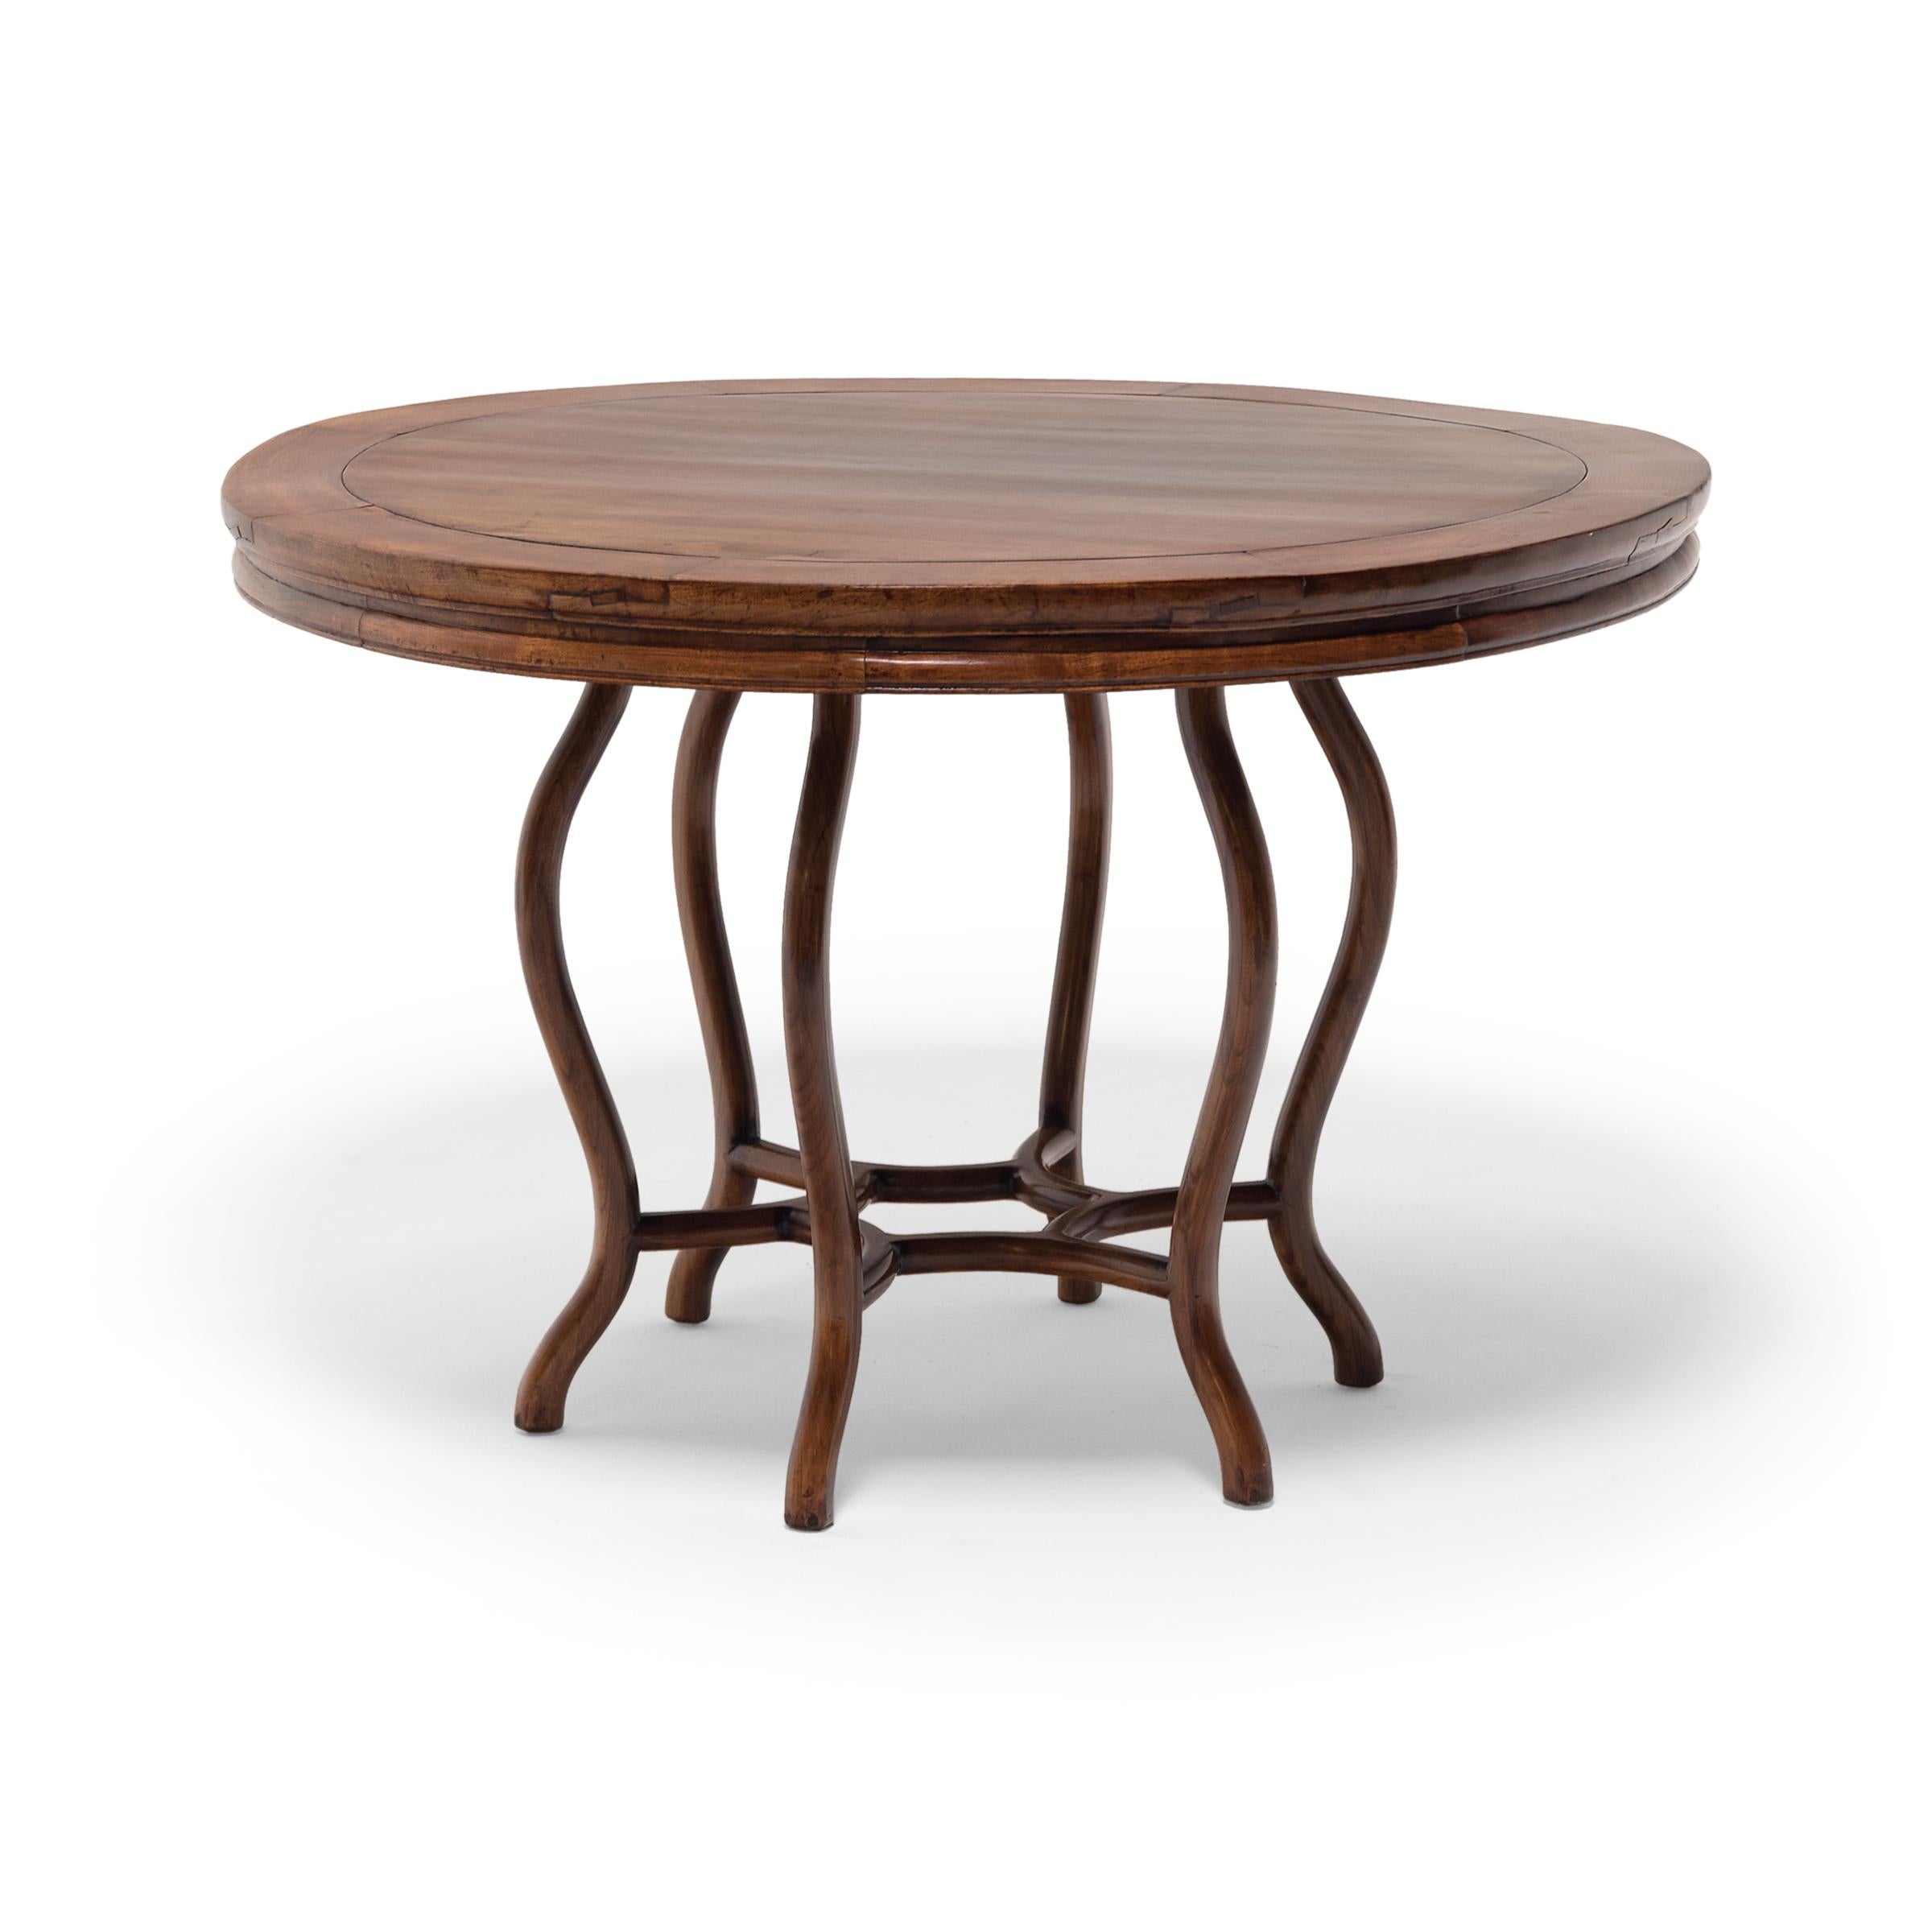 With an expansive round tabletop and sinuous curved legs, this late 19th century tea table was likely designed with Western tastes in mind. The round table was crafted in Zhejiang province, the round table is constructed of a Chinese hardwood with